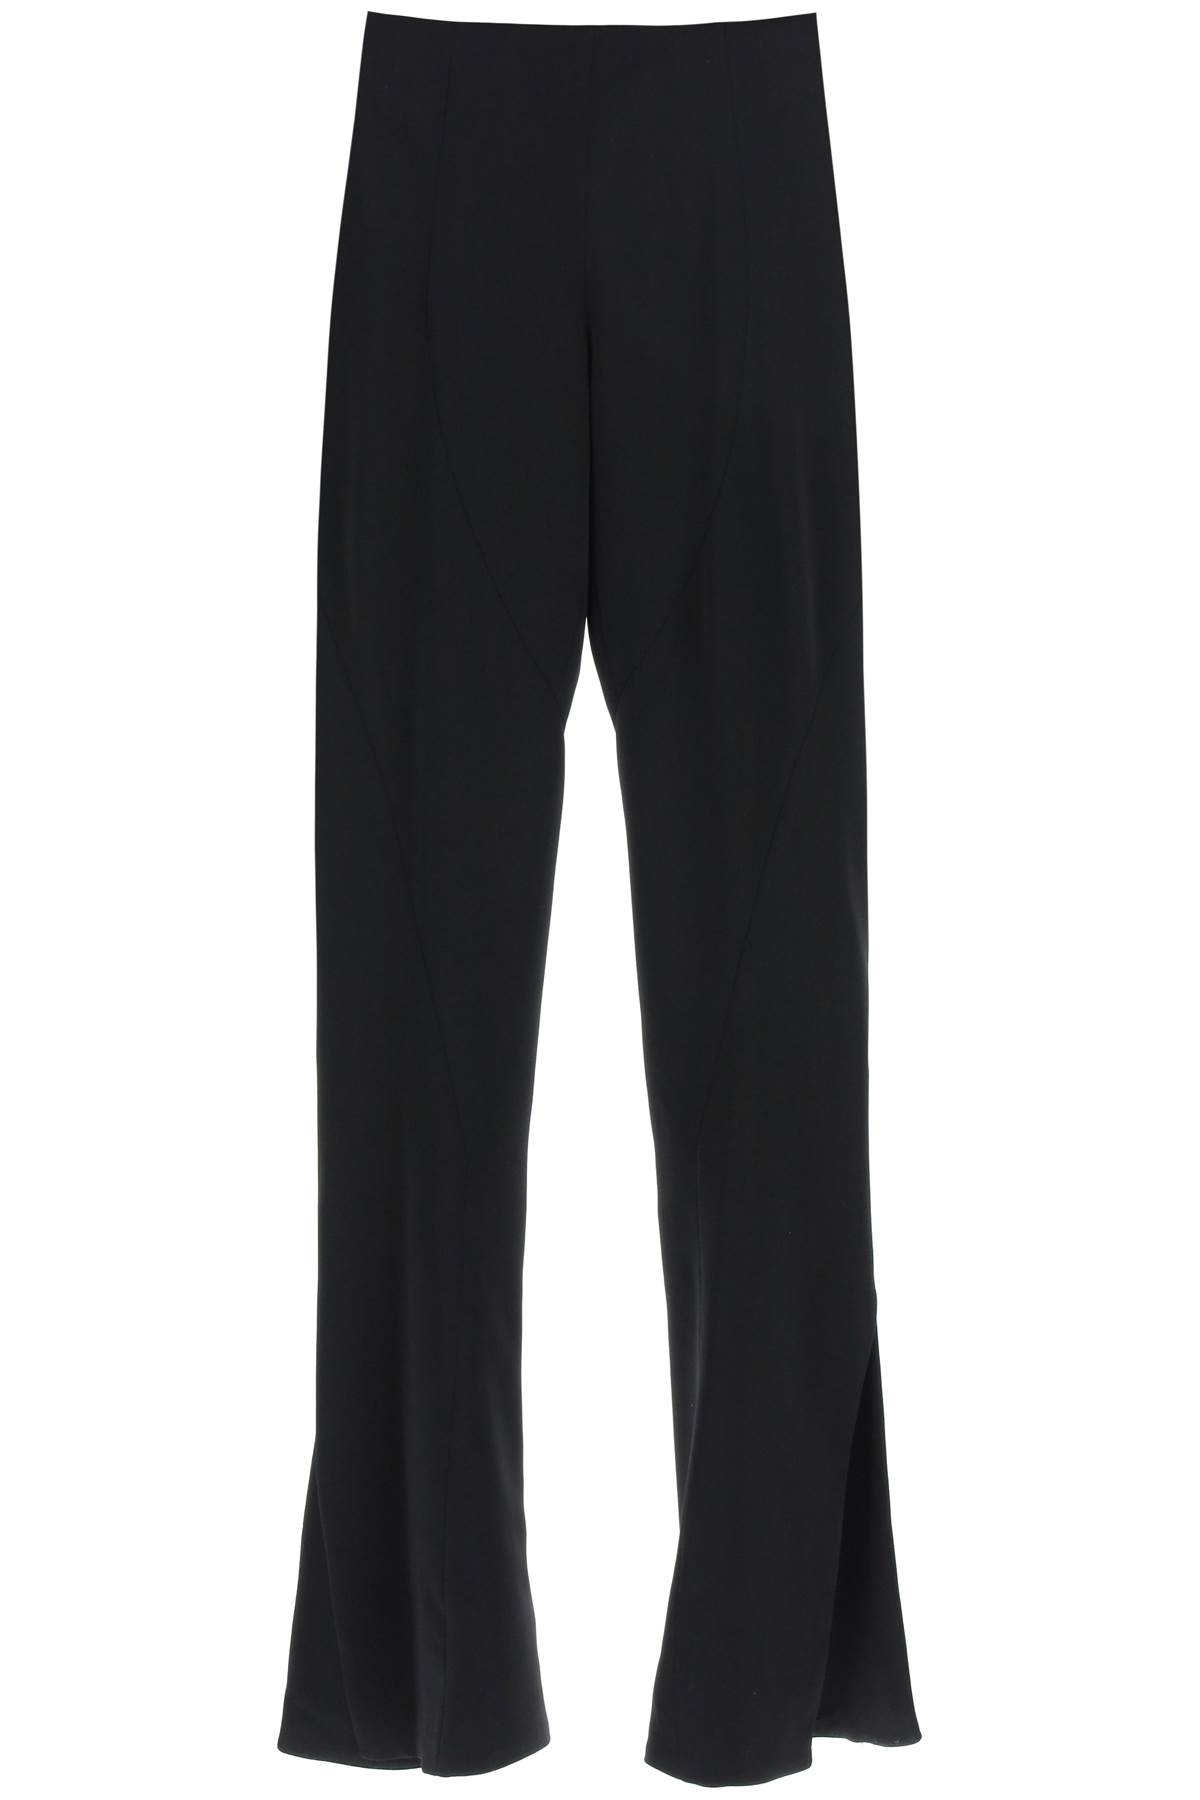 MONOT FLARED TROUSERS WITH SLITS